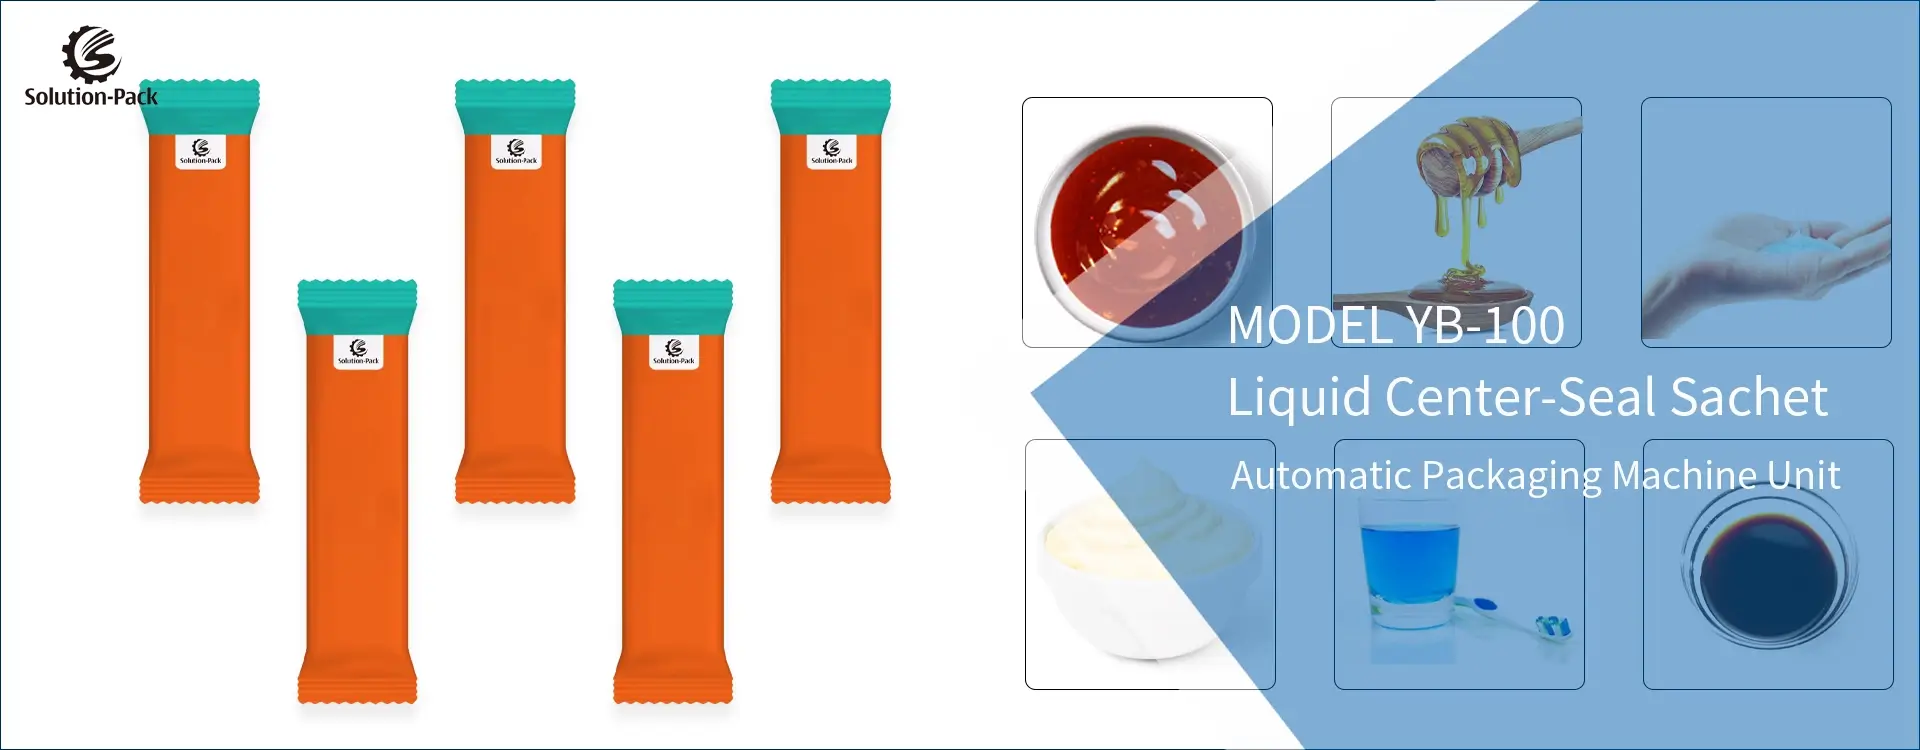 Model YB-100 Automatic Liquid Center-Seal Stick Sachet Packaging Machine Heading Banner Picture | Solution-Pack